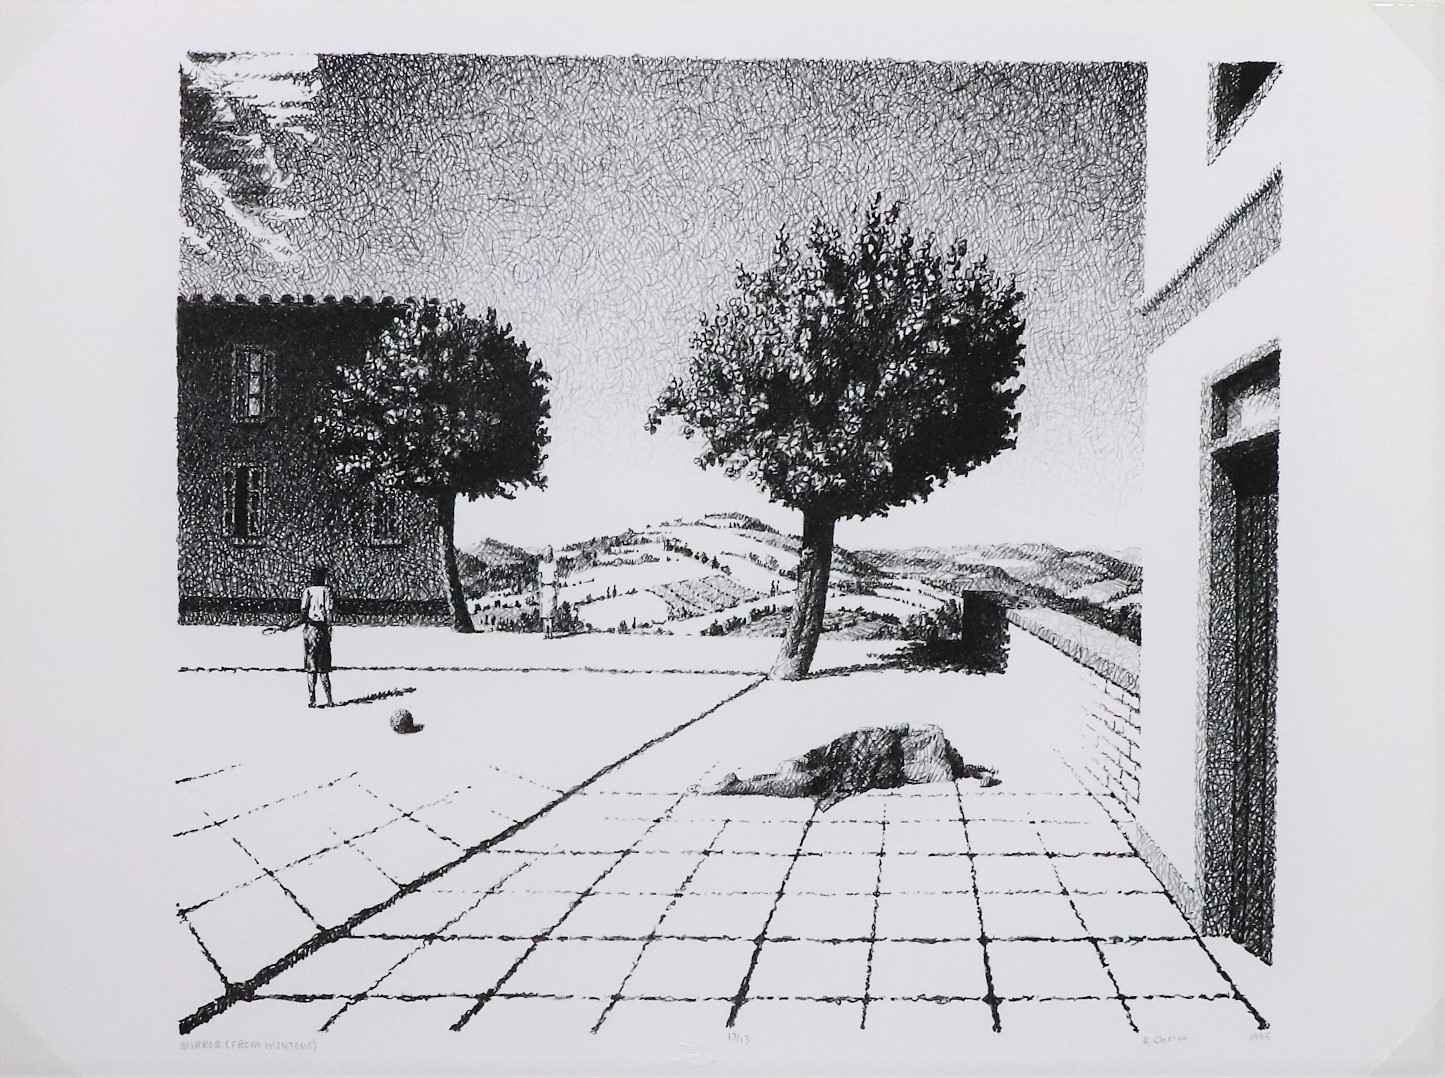 Ron Christ, “Mirror (From Montone,)” Lithograph